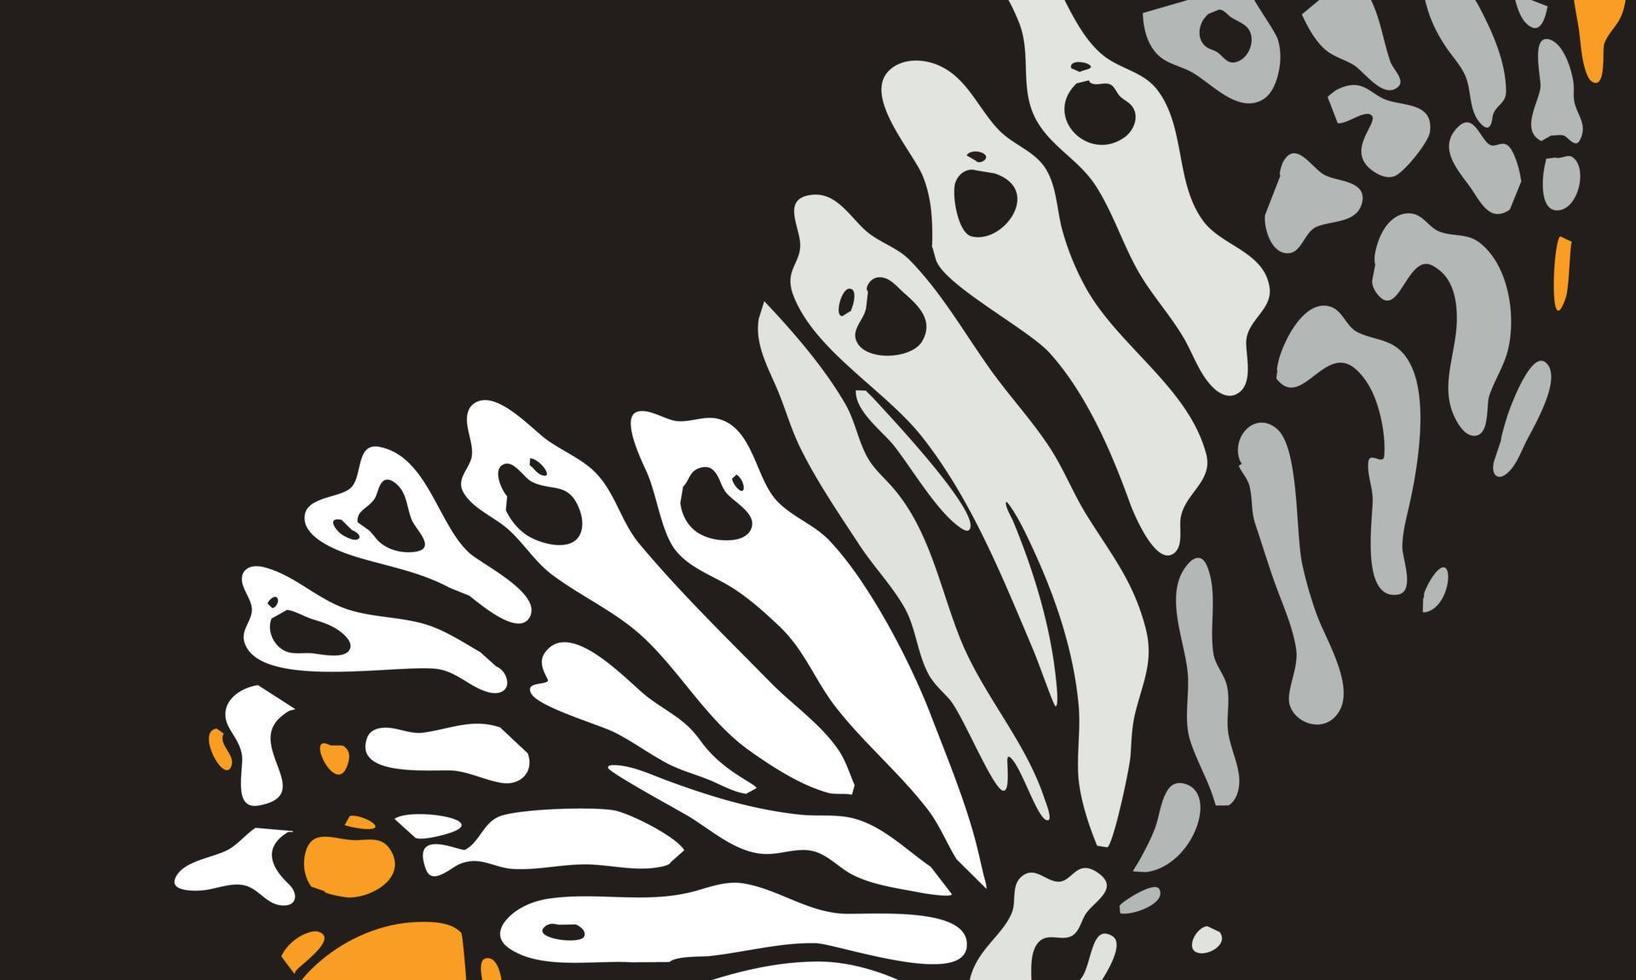 Butterfly color style vector with black background. Butterfly wings with grey and orange color. Design templates for background, social media, template, poster, invitation, card design and more